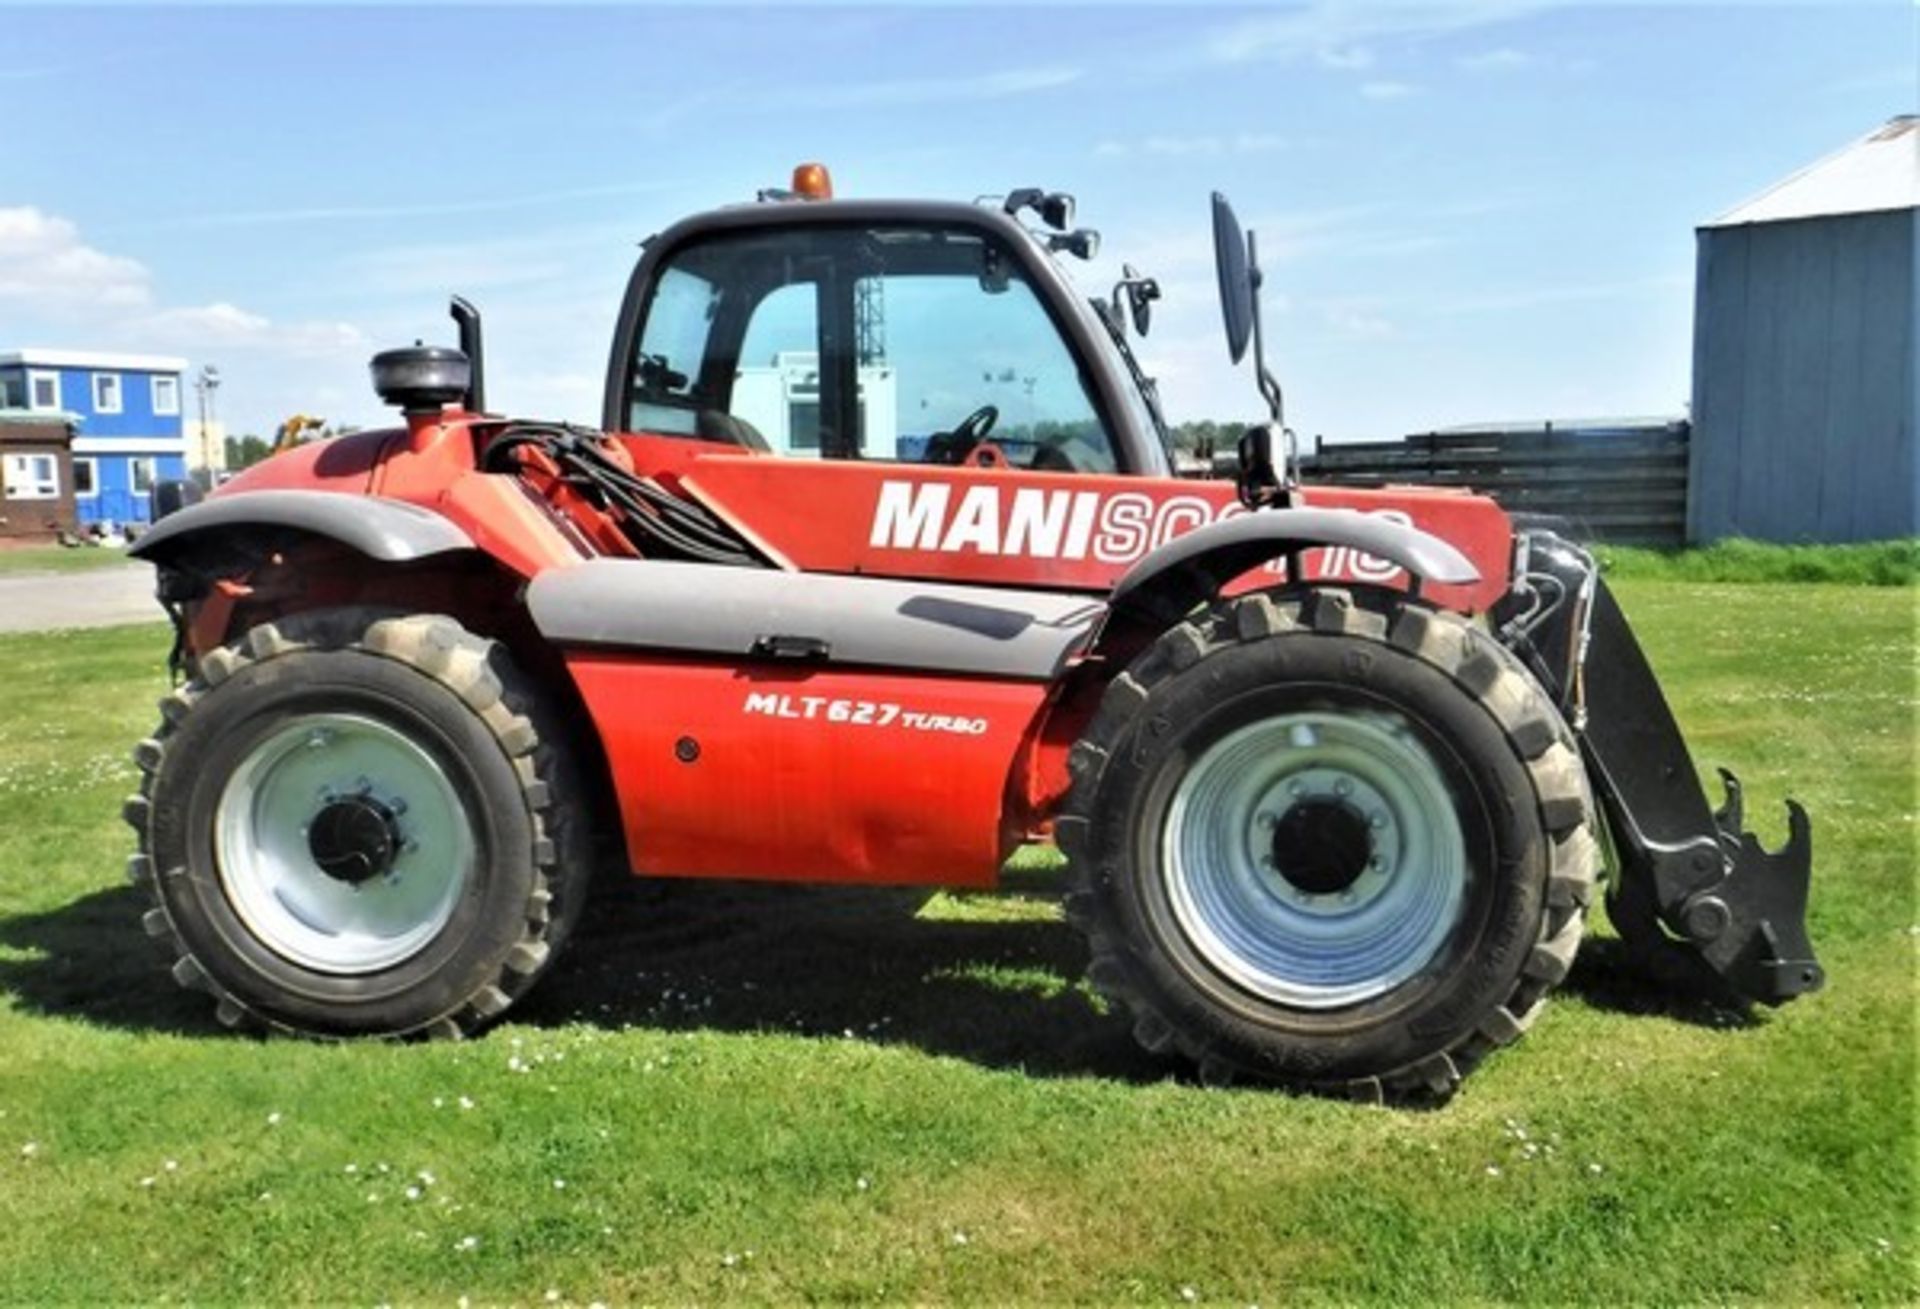 2011 MANITOU MLT627 TURBO. Air con. Solid filled tyres. Reg No SP60 ECW. 4798hrs (not verified)